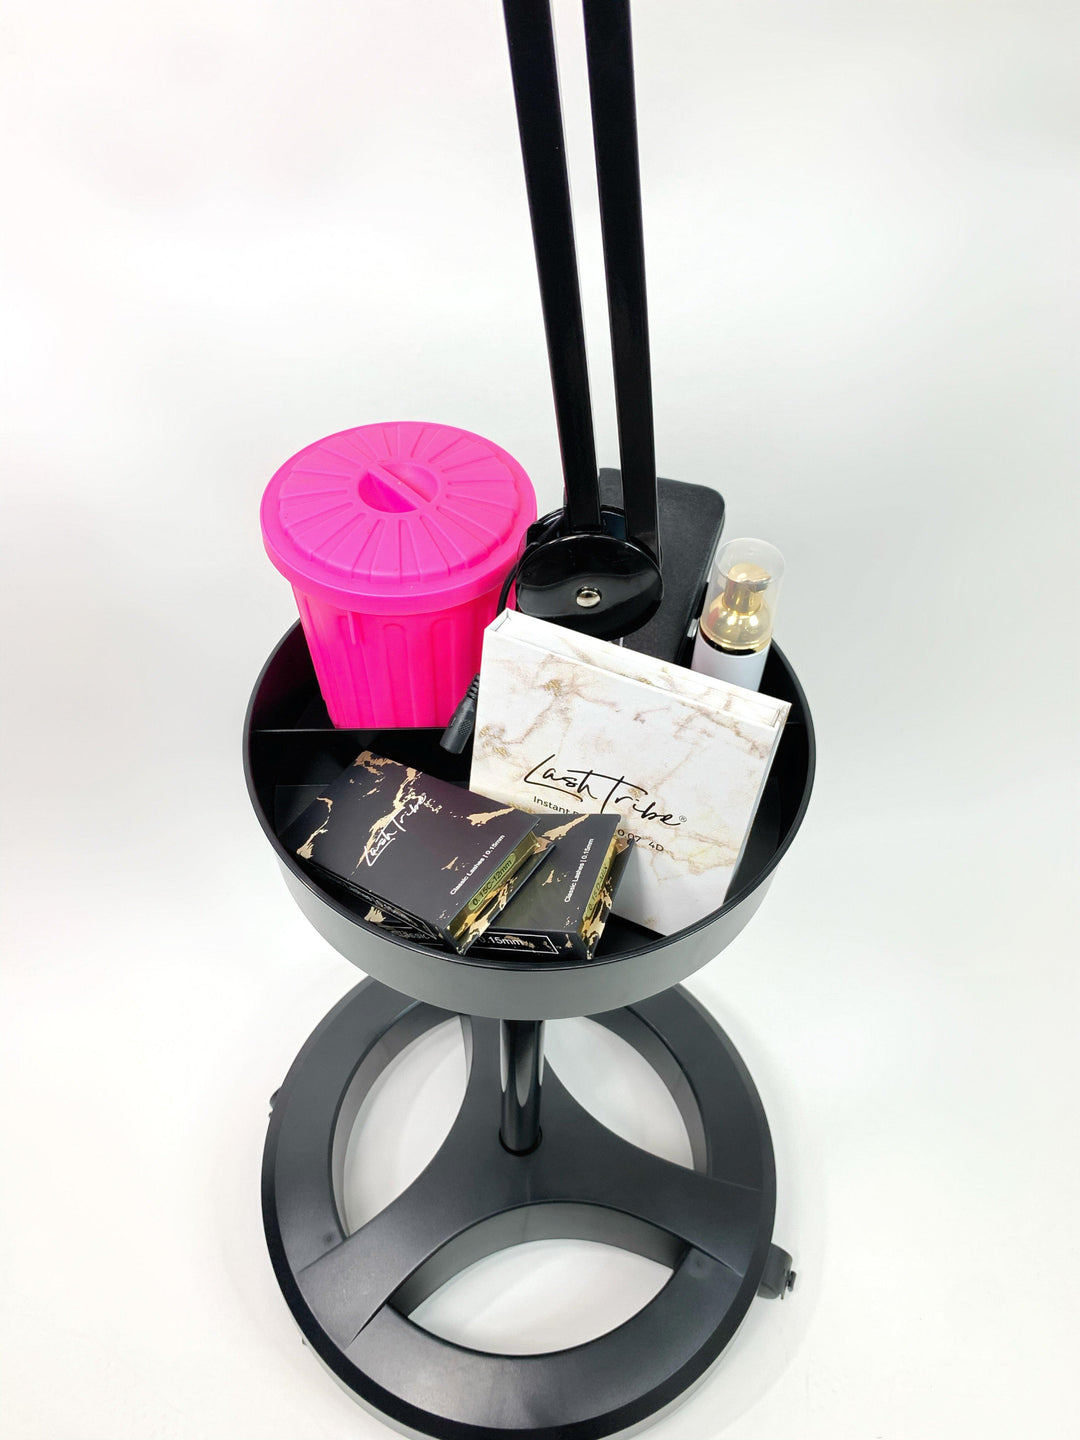 A Lash Tribe black tray with a Lash Light with Storage Tray | Lash Salon Light pink bottle and other items on it.